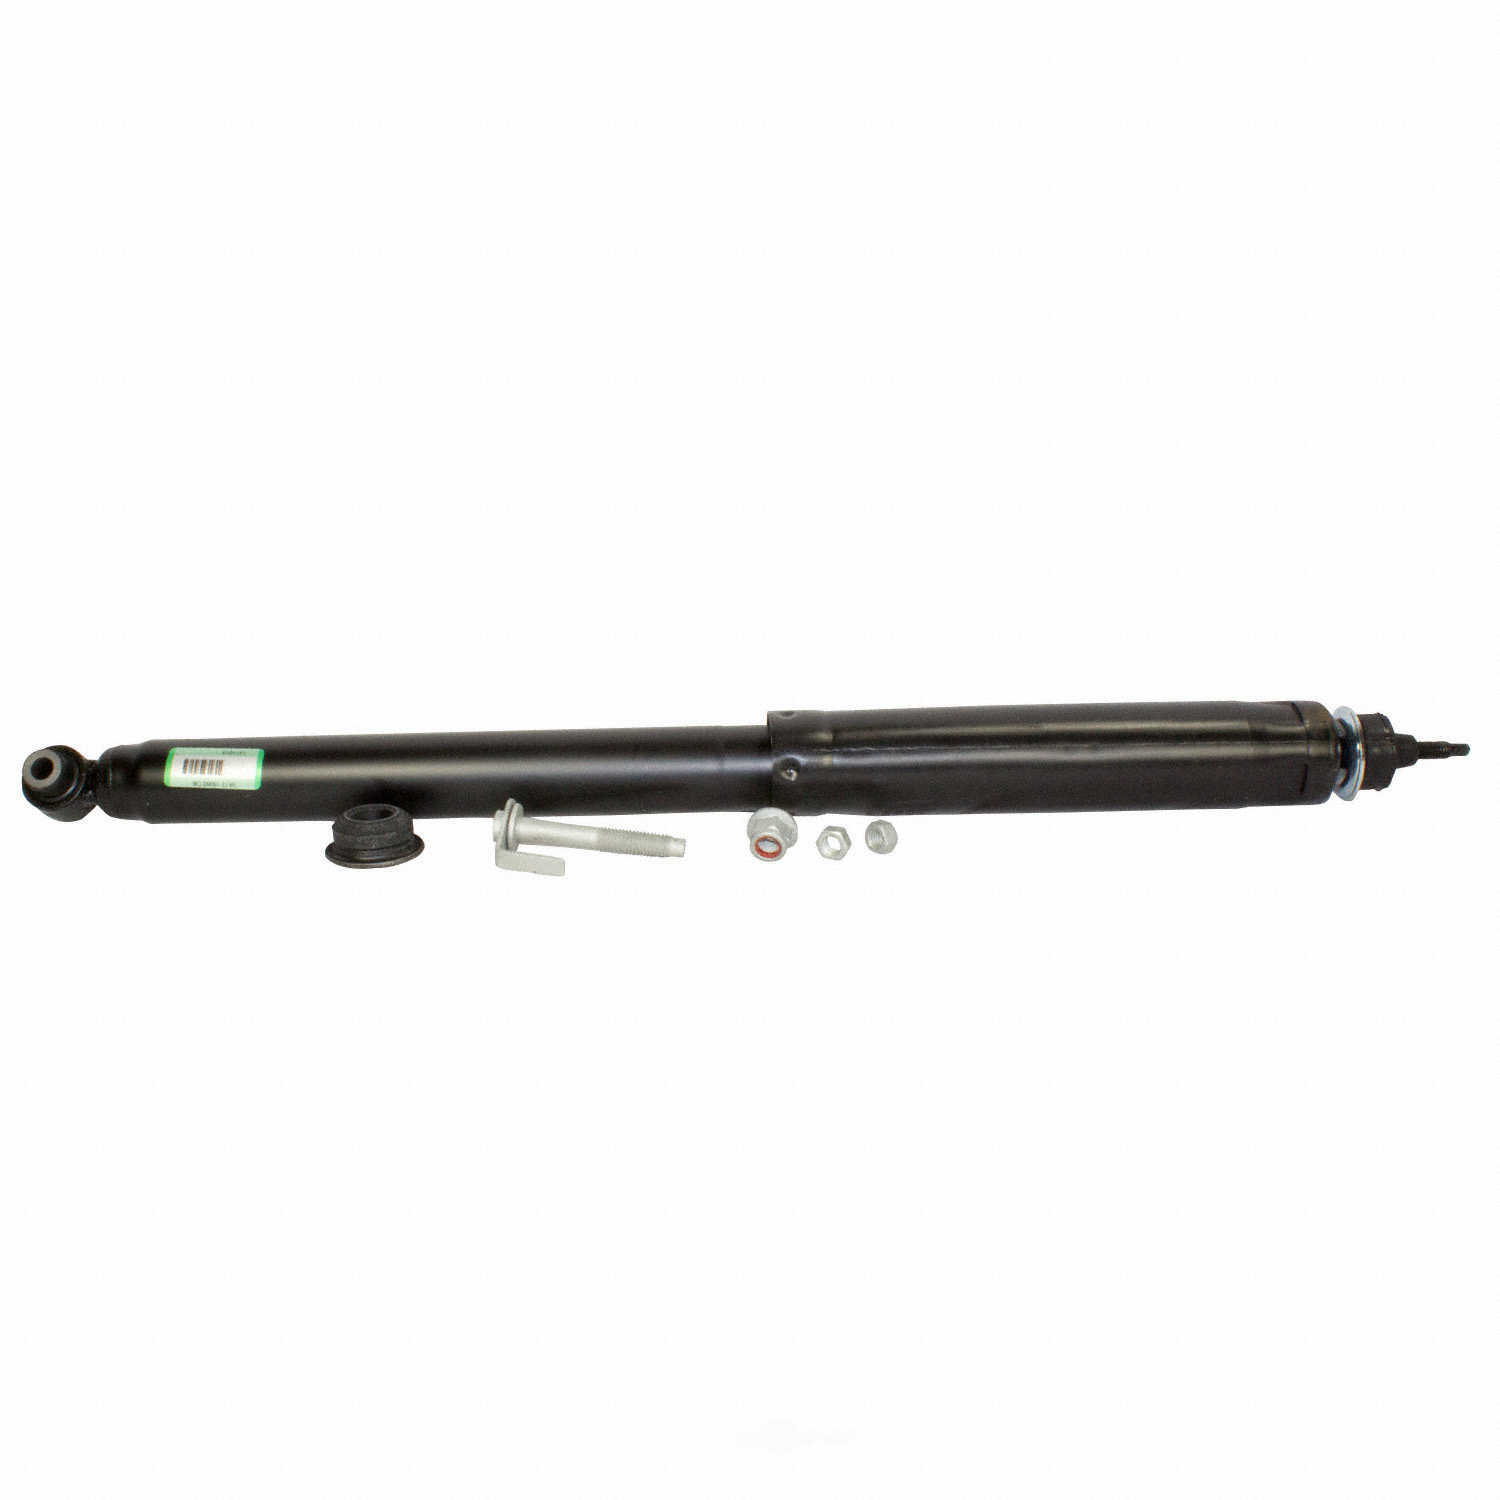 MOTORCRAFT - Shock ABSorber - New (With ABS Brakes, Rear) - MOT ASH-1158